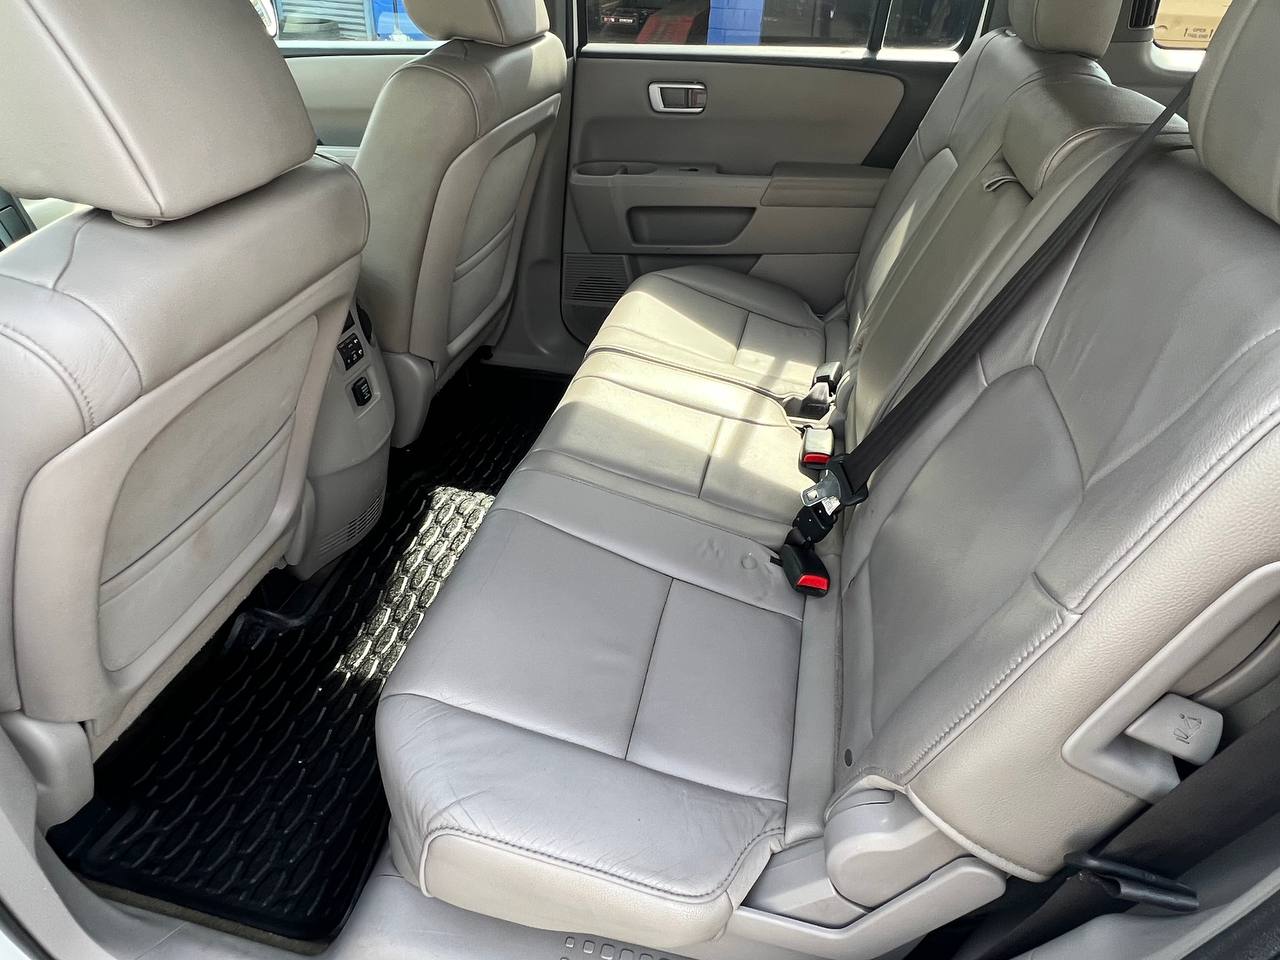 Used - Honda PILOT EX L SUV for sale in Staten Island NY